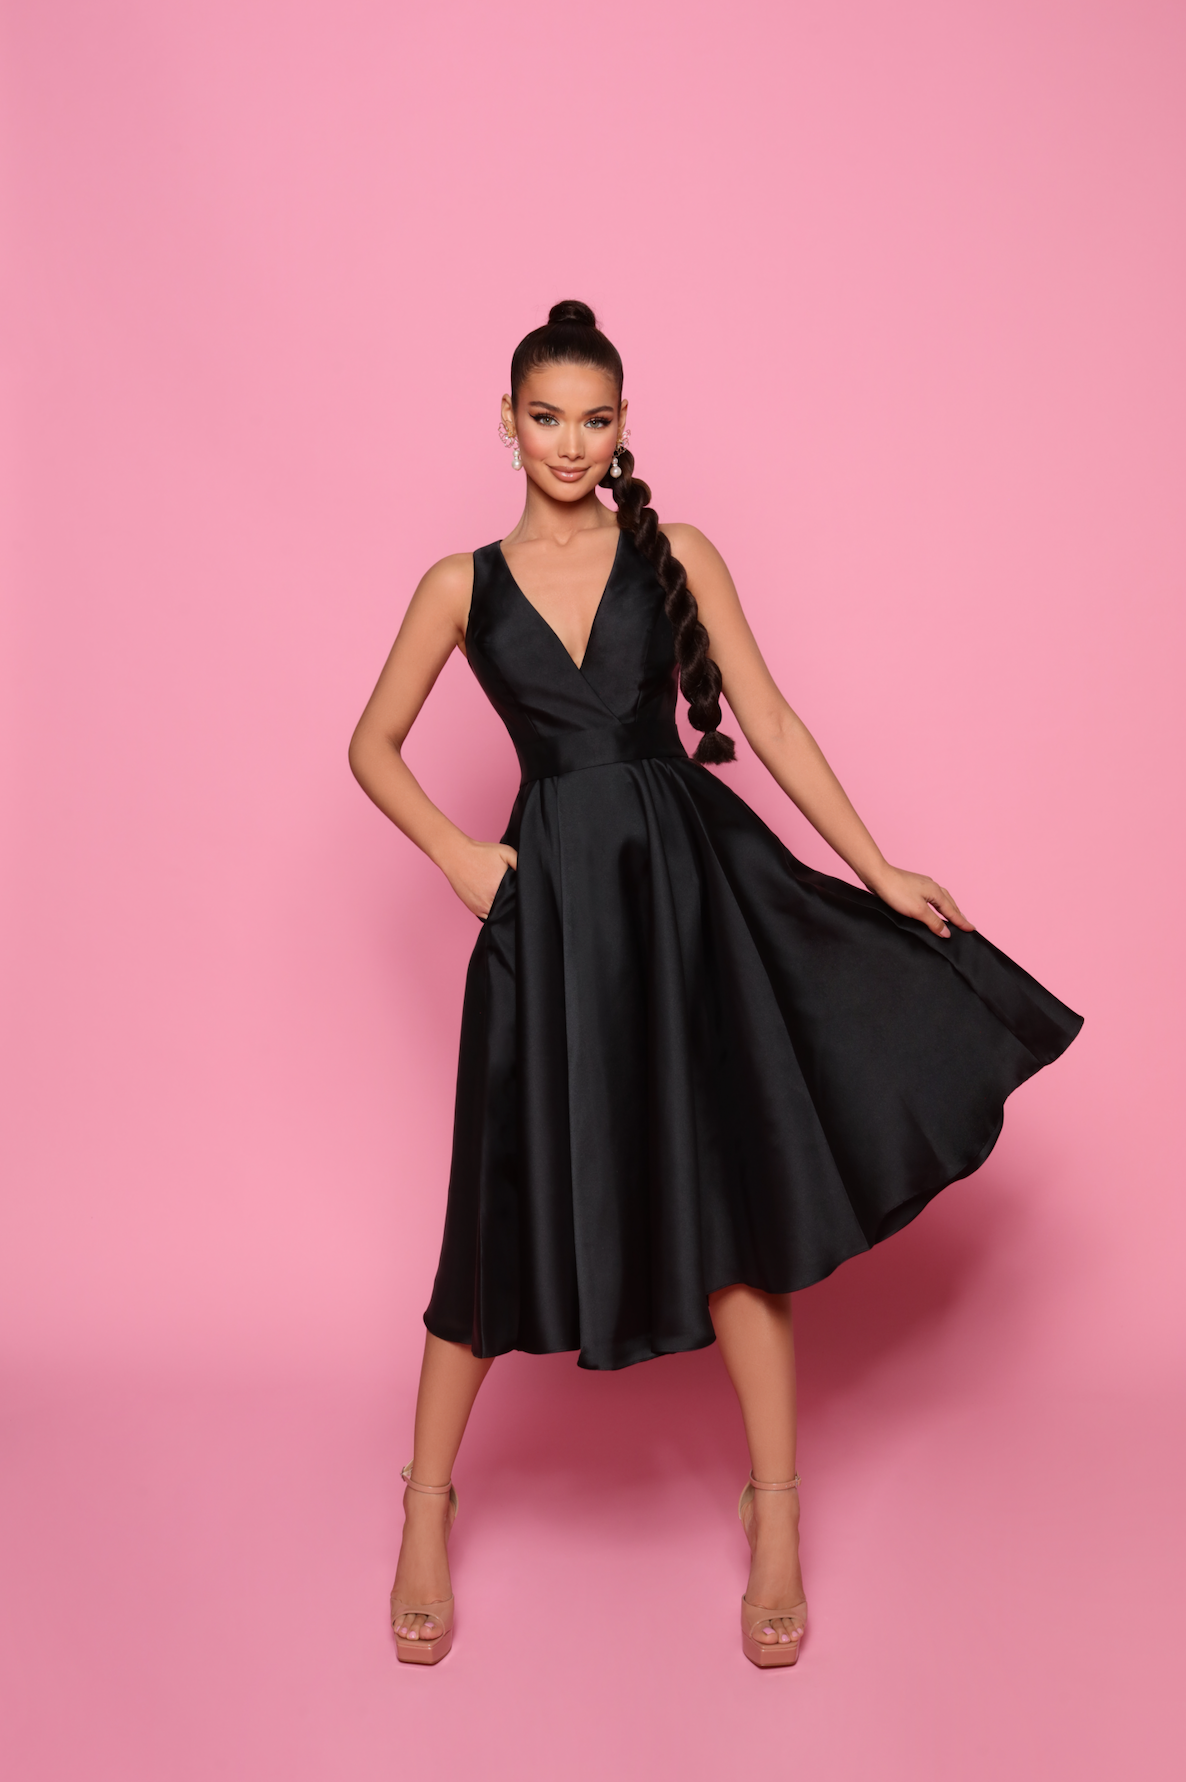 NEW ARRIVAL! Nicoletta Style number NP150. A beautful and fun cocktail dress you can wear during a night out with your significant other. Available at Madeline's Boutique in Toronto, Ontario and Boca Raton, Florida.